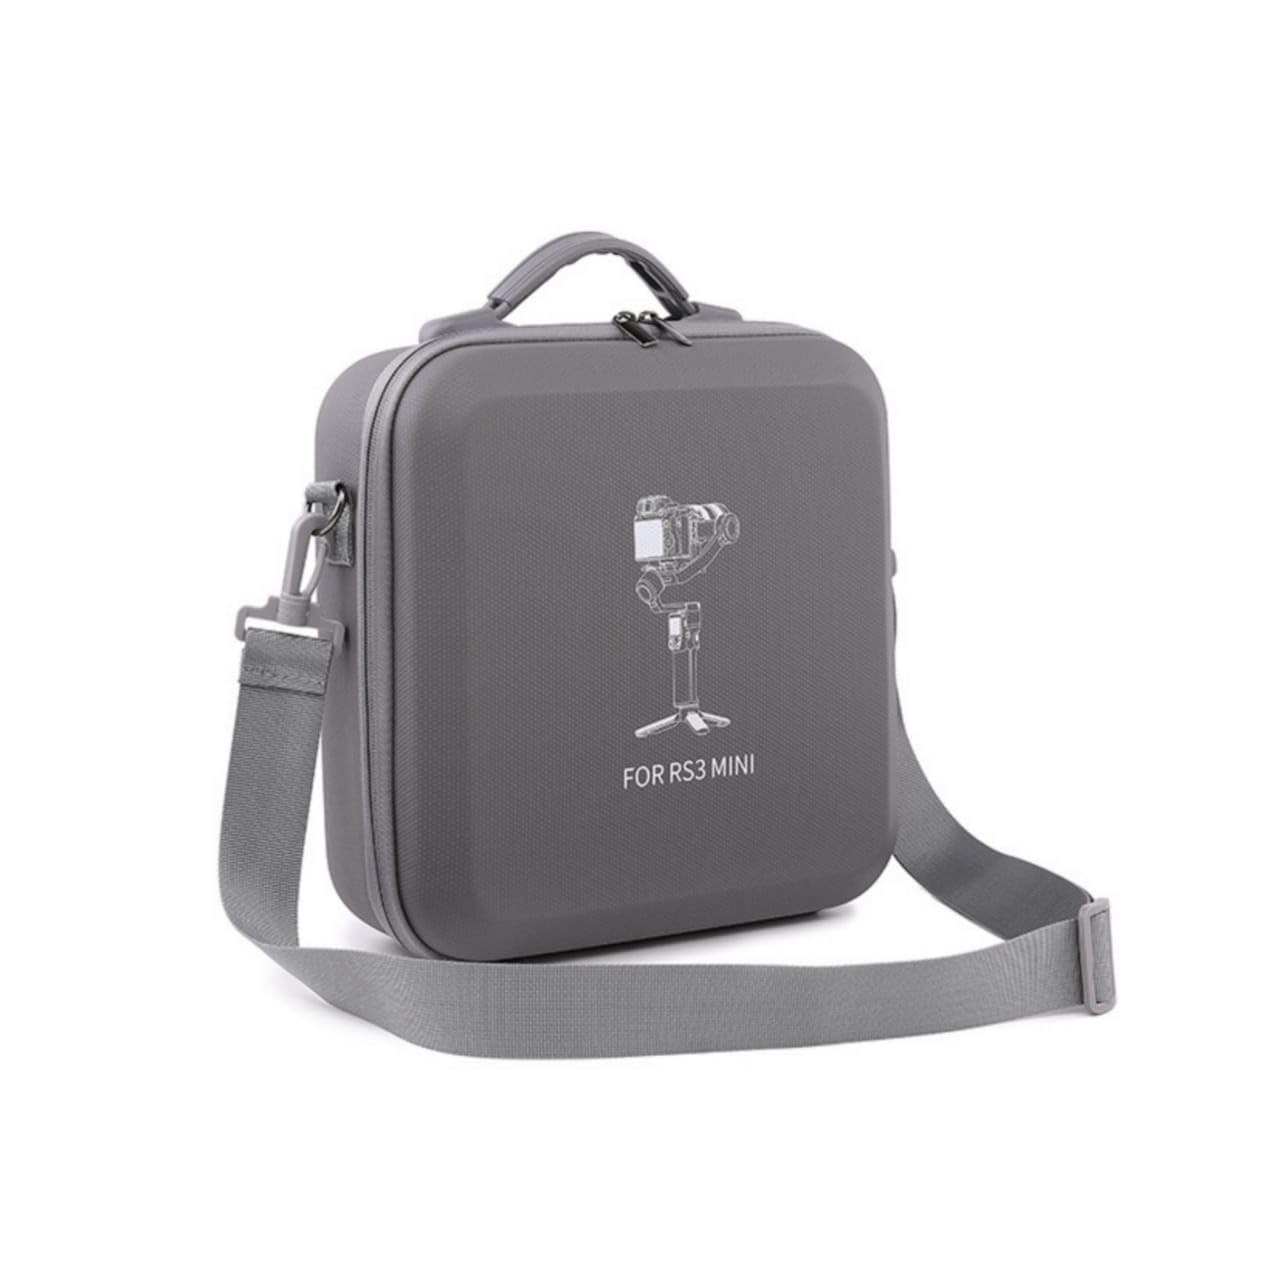 Carrying case Bag for DJI Rs 3 Mini DSLR Gimbal and Accessories 